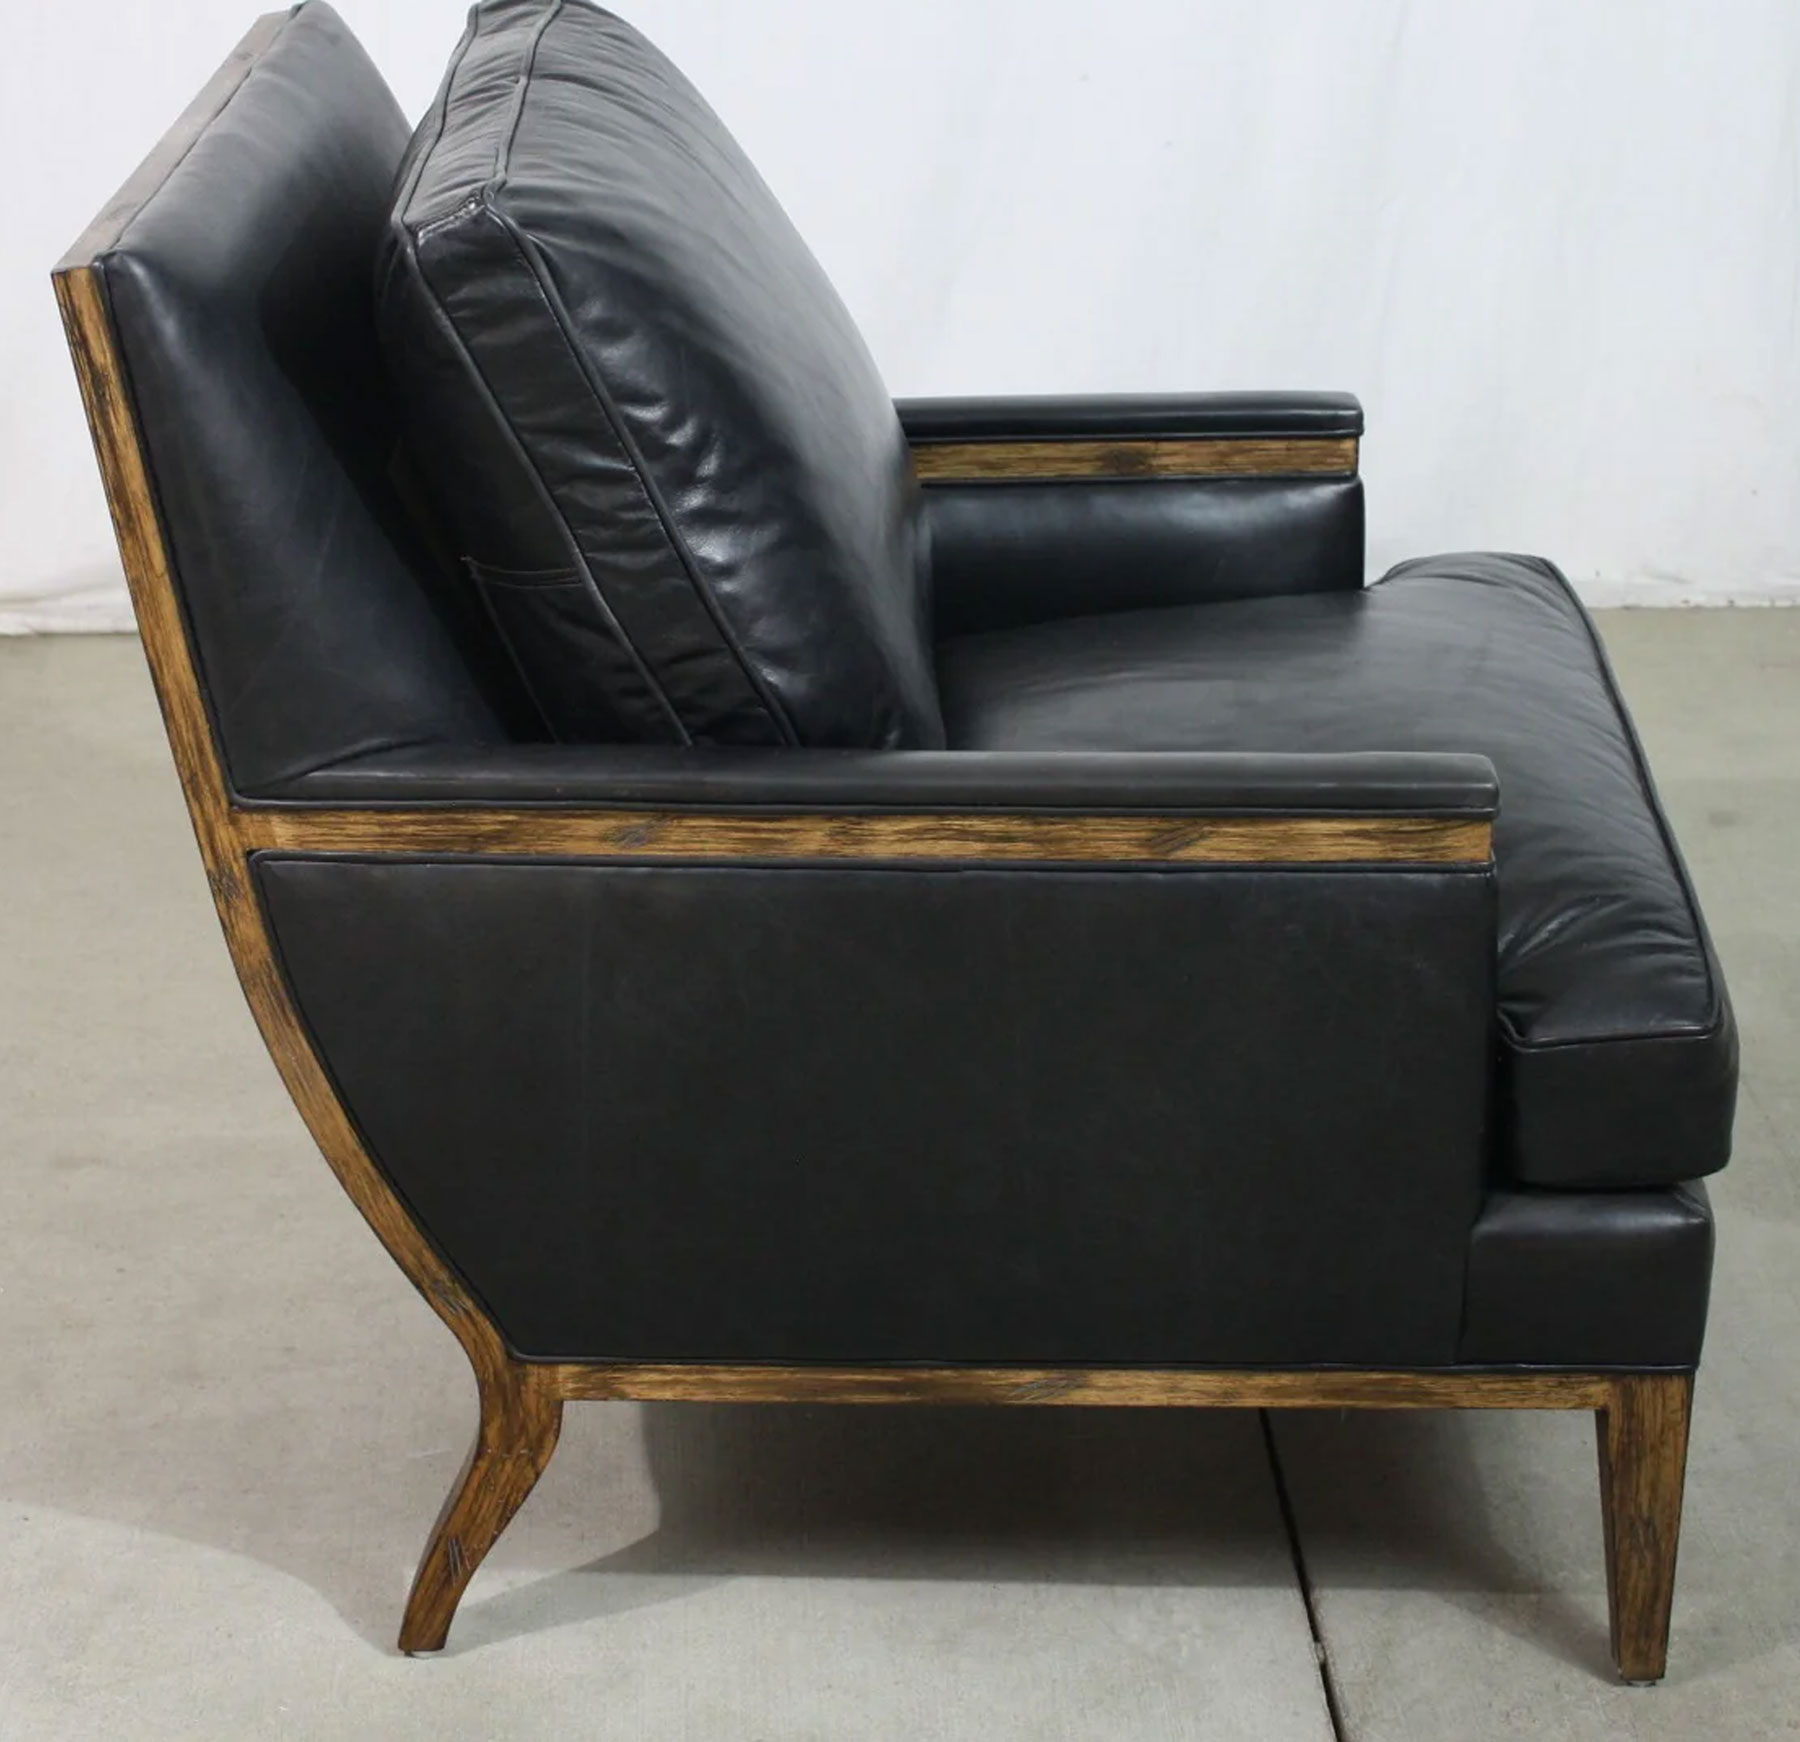 Our House 763 Oslo Lounge Chair in Hazy Black Leather